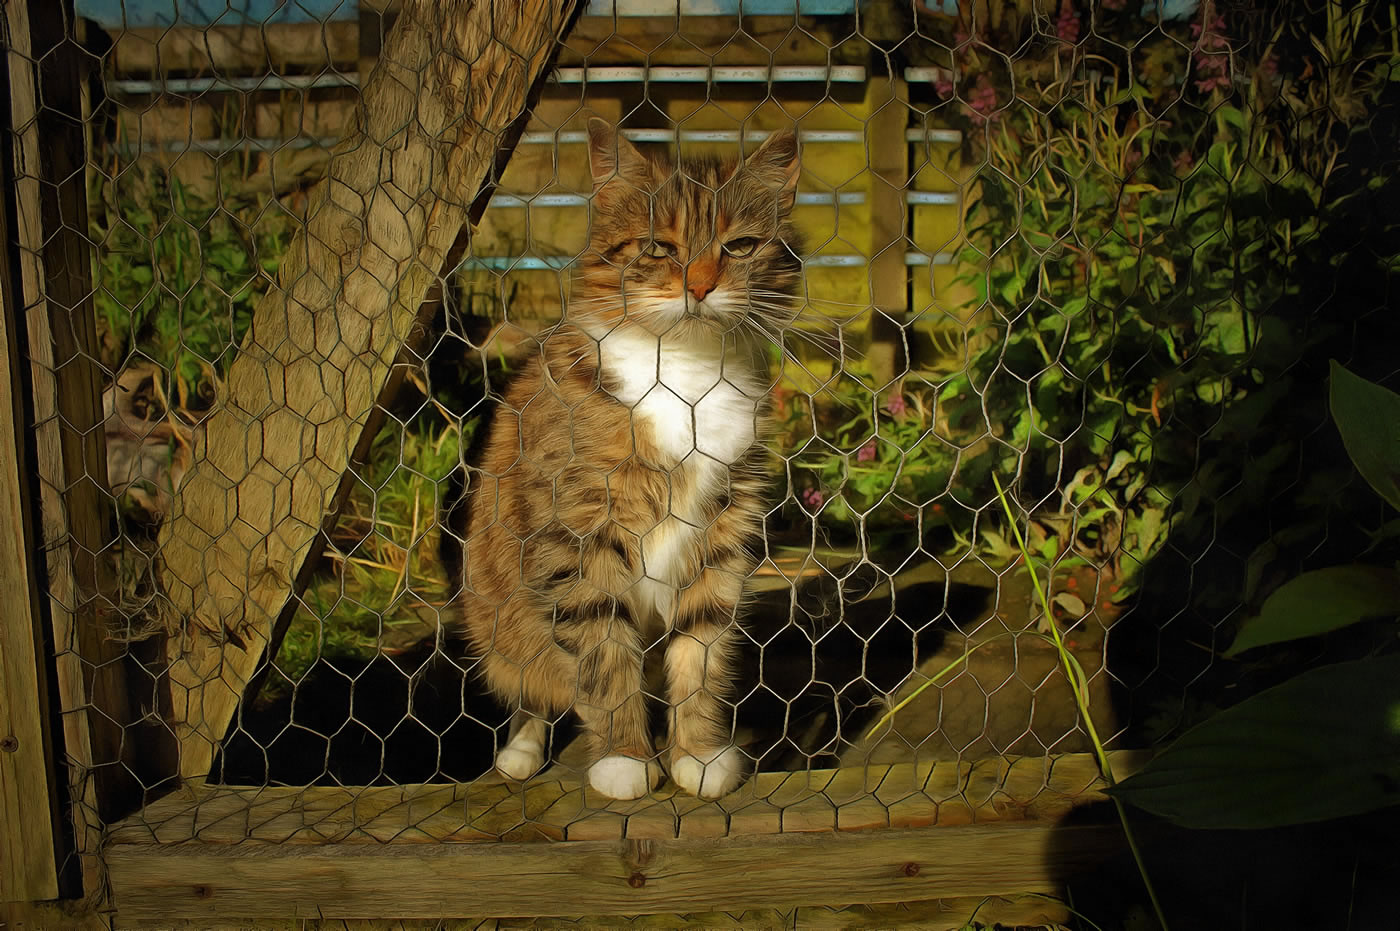 Free art image 2 of Meg, one of our outdoor barn cat